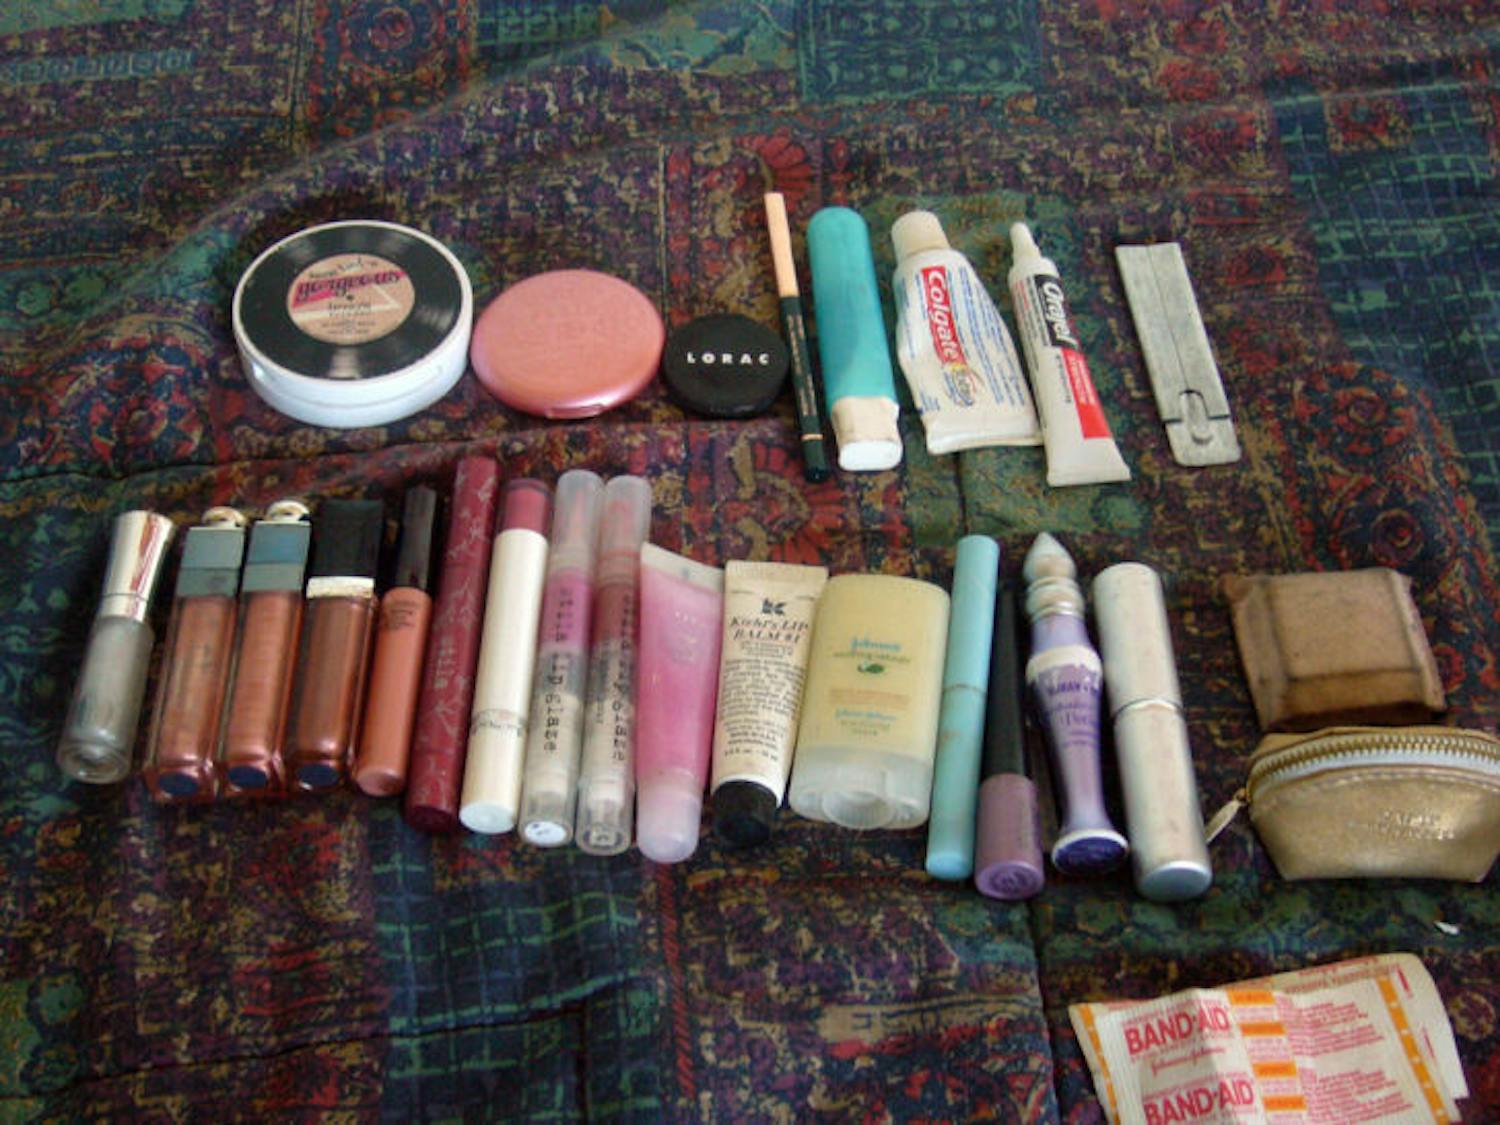 "What's In My Makeup Bag" by Kim, used under CC BY-NC-SA 2.0